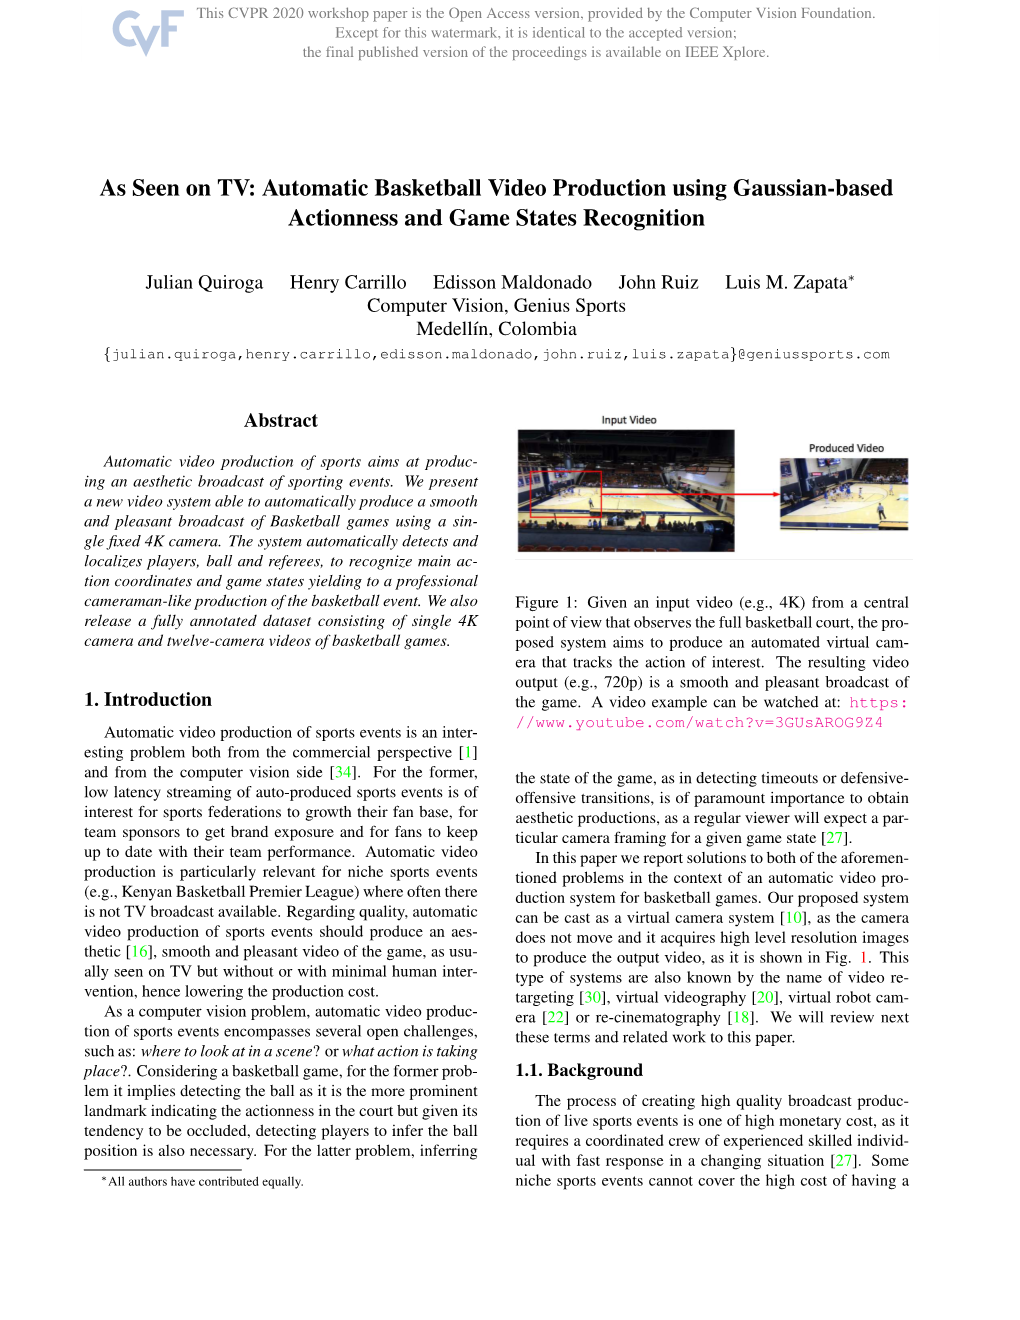 As Seen on TV: Automatic Basketball Video Production Using Gaussian-Based Actionness and Game States Recognition